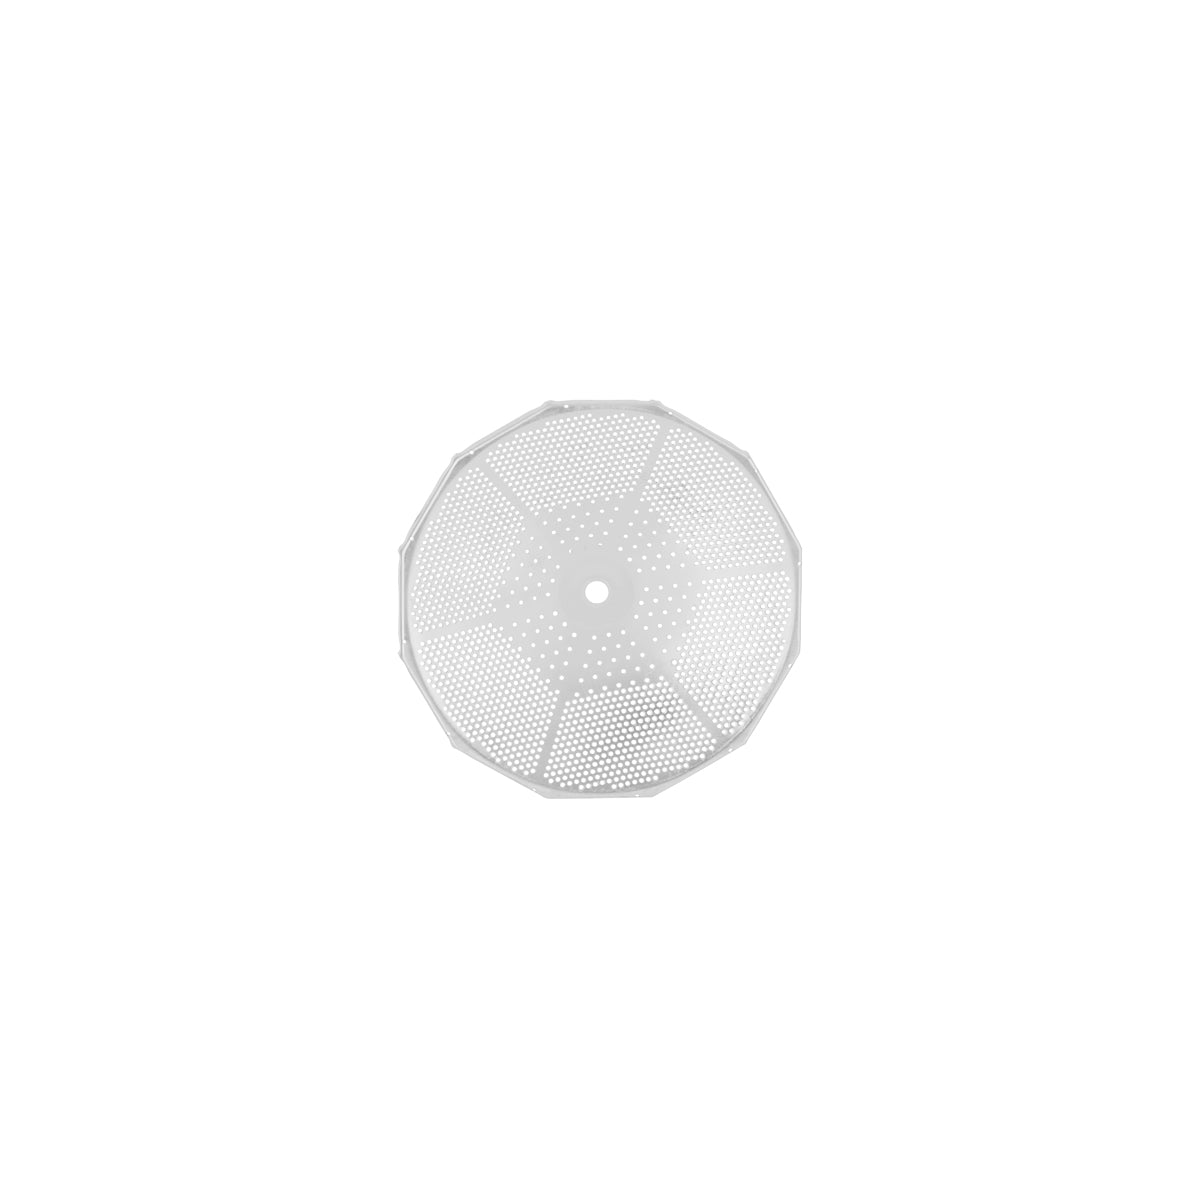 PD2573-91 Paderno Blade 1.5mm For Food Mill 310mm Tomkin Australia Hospitality Supplies